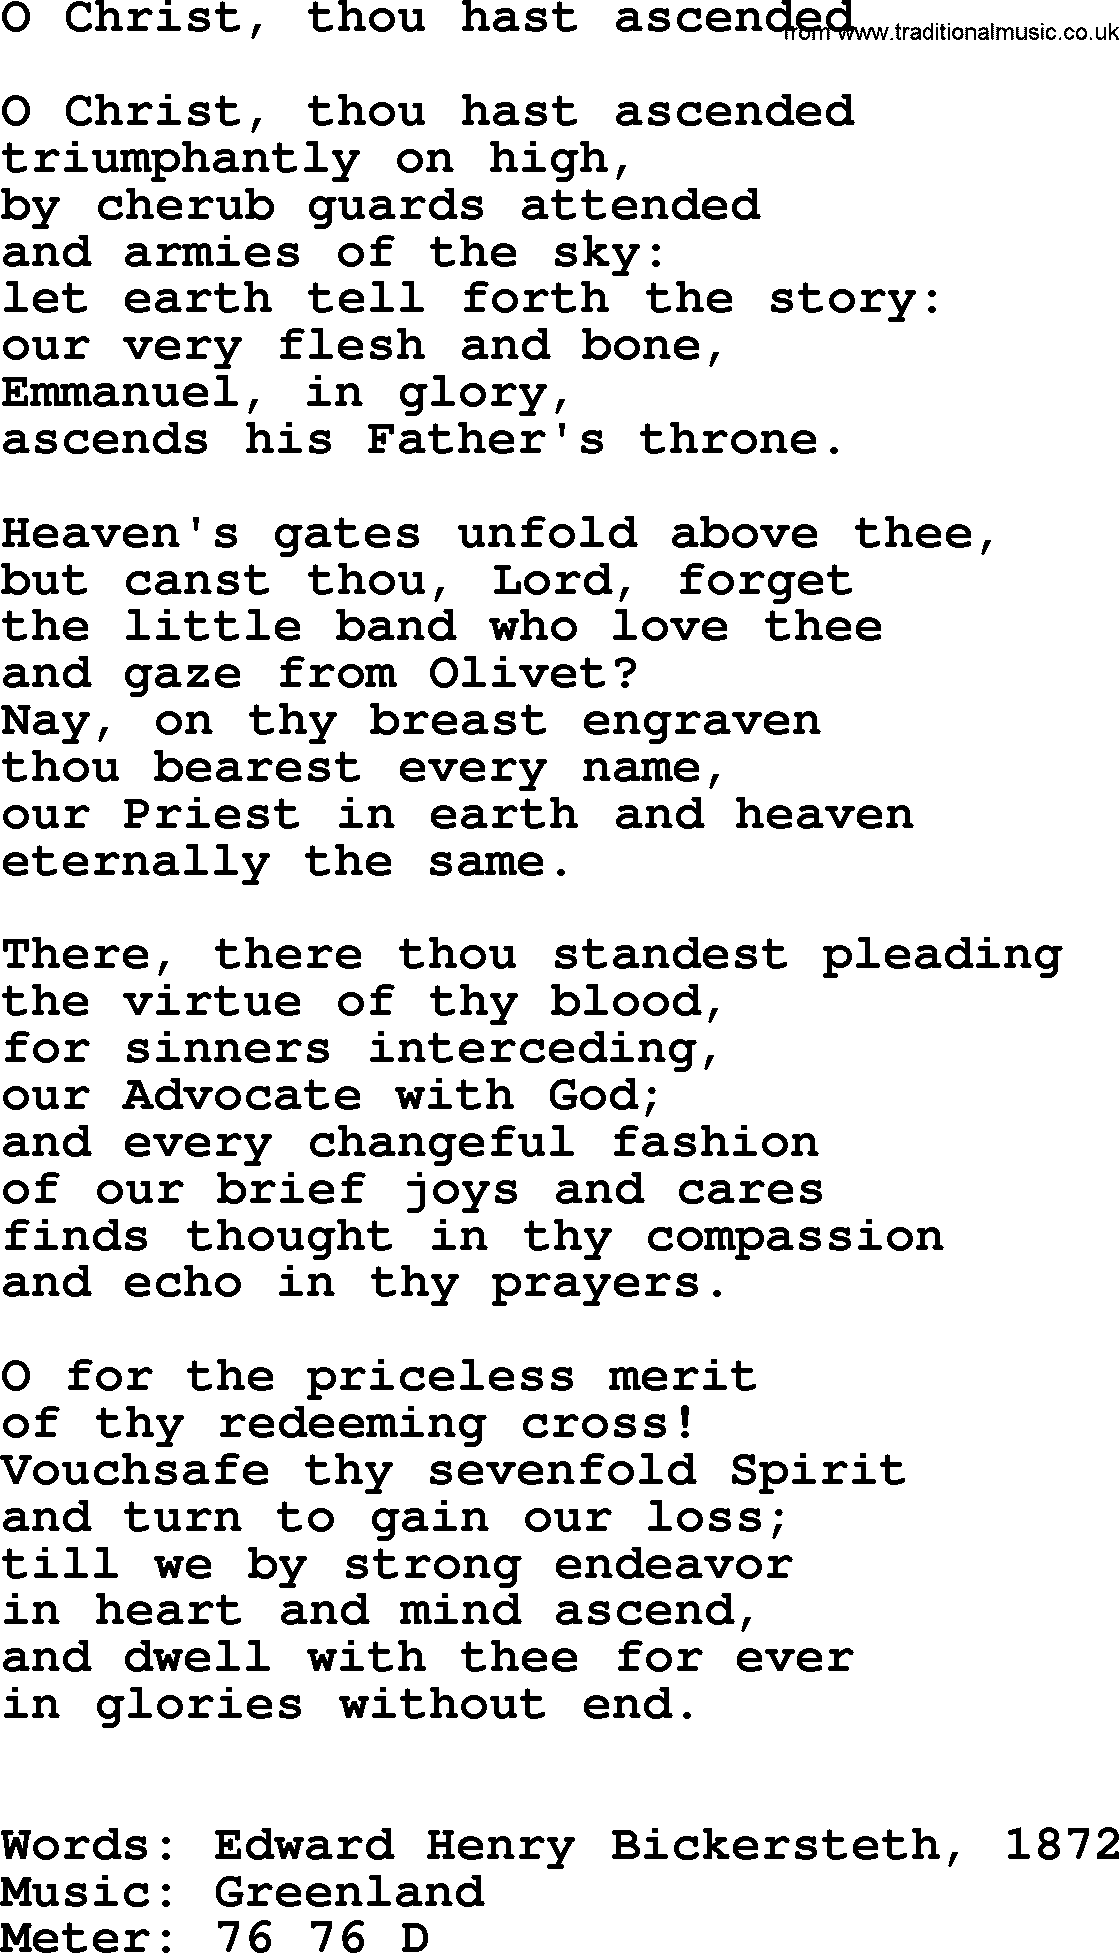 Ascensiontide Hynms collection, Hymn: O Christ, Thou Hast Ascended, lyrics and PDF